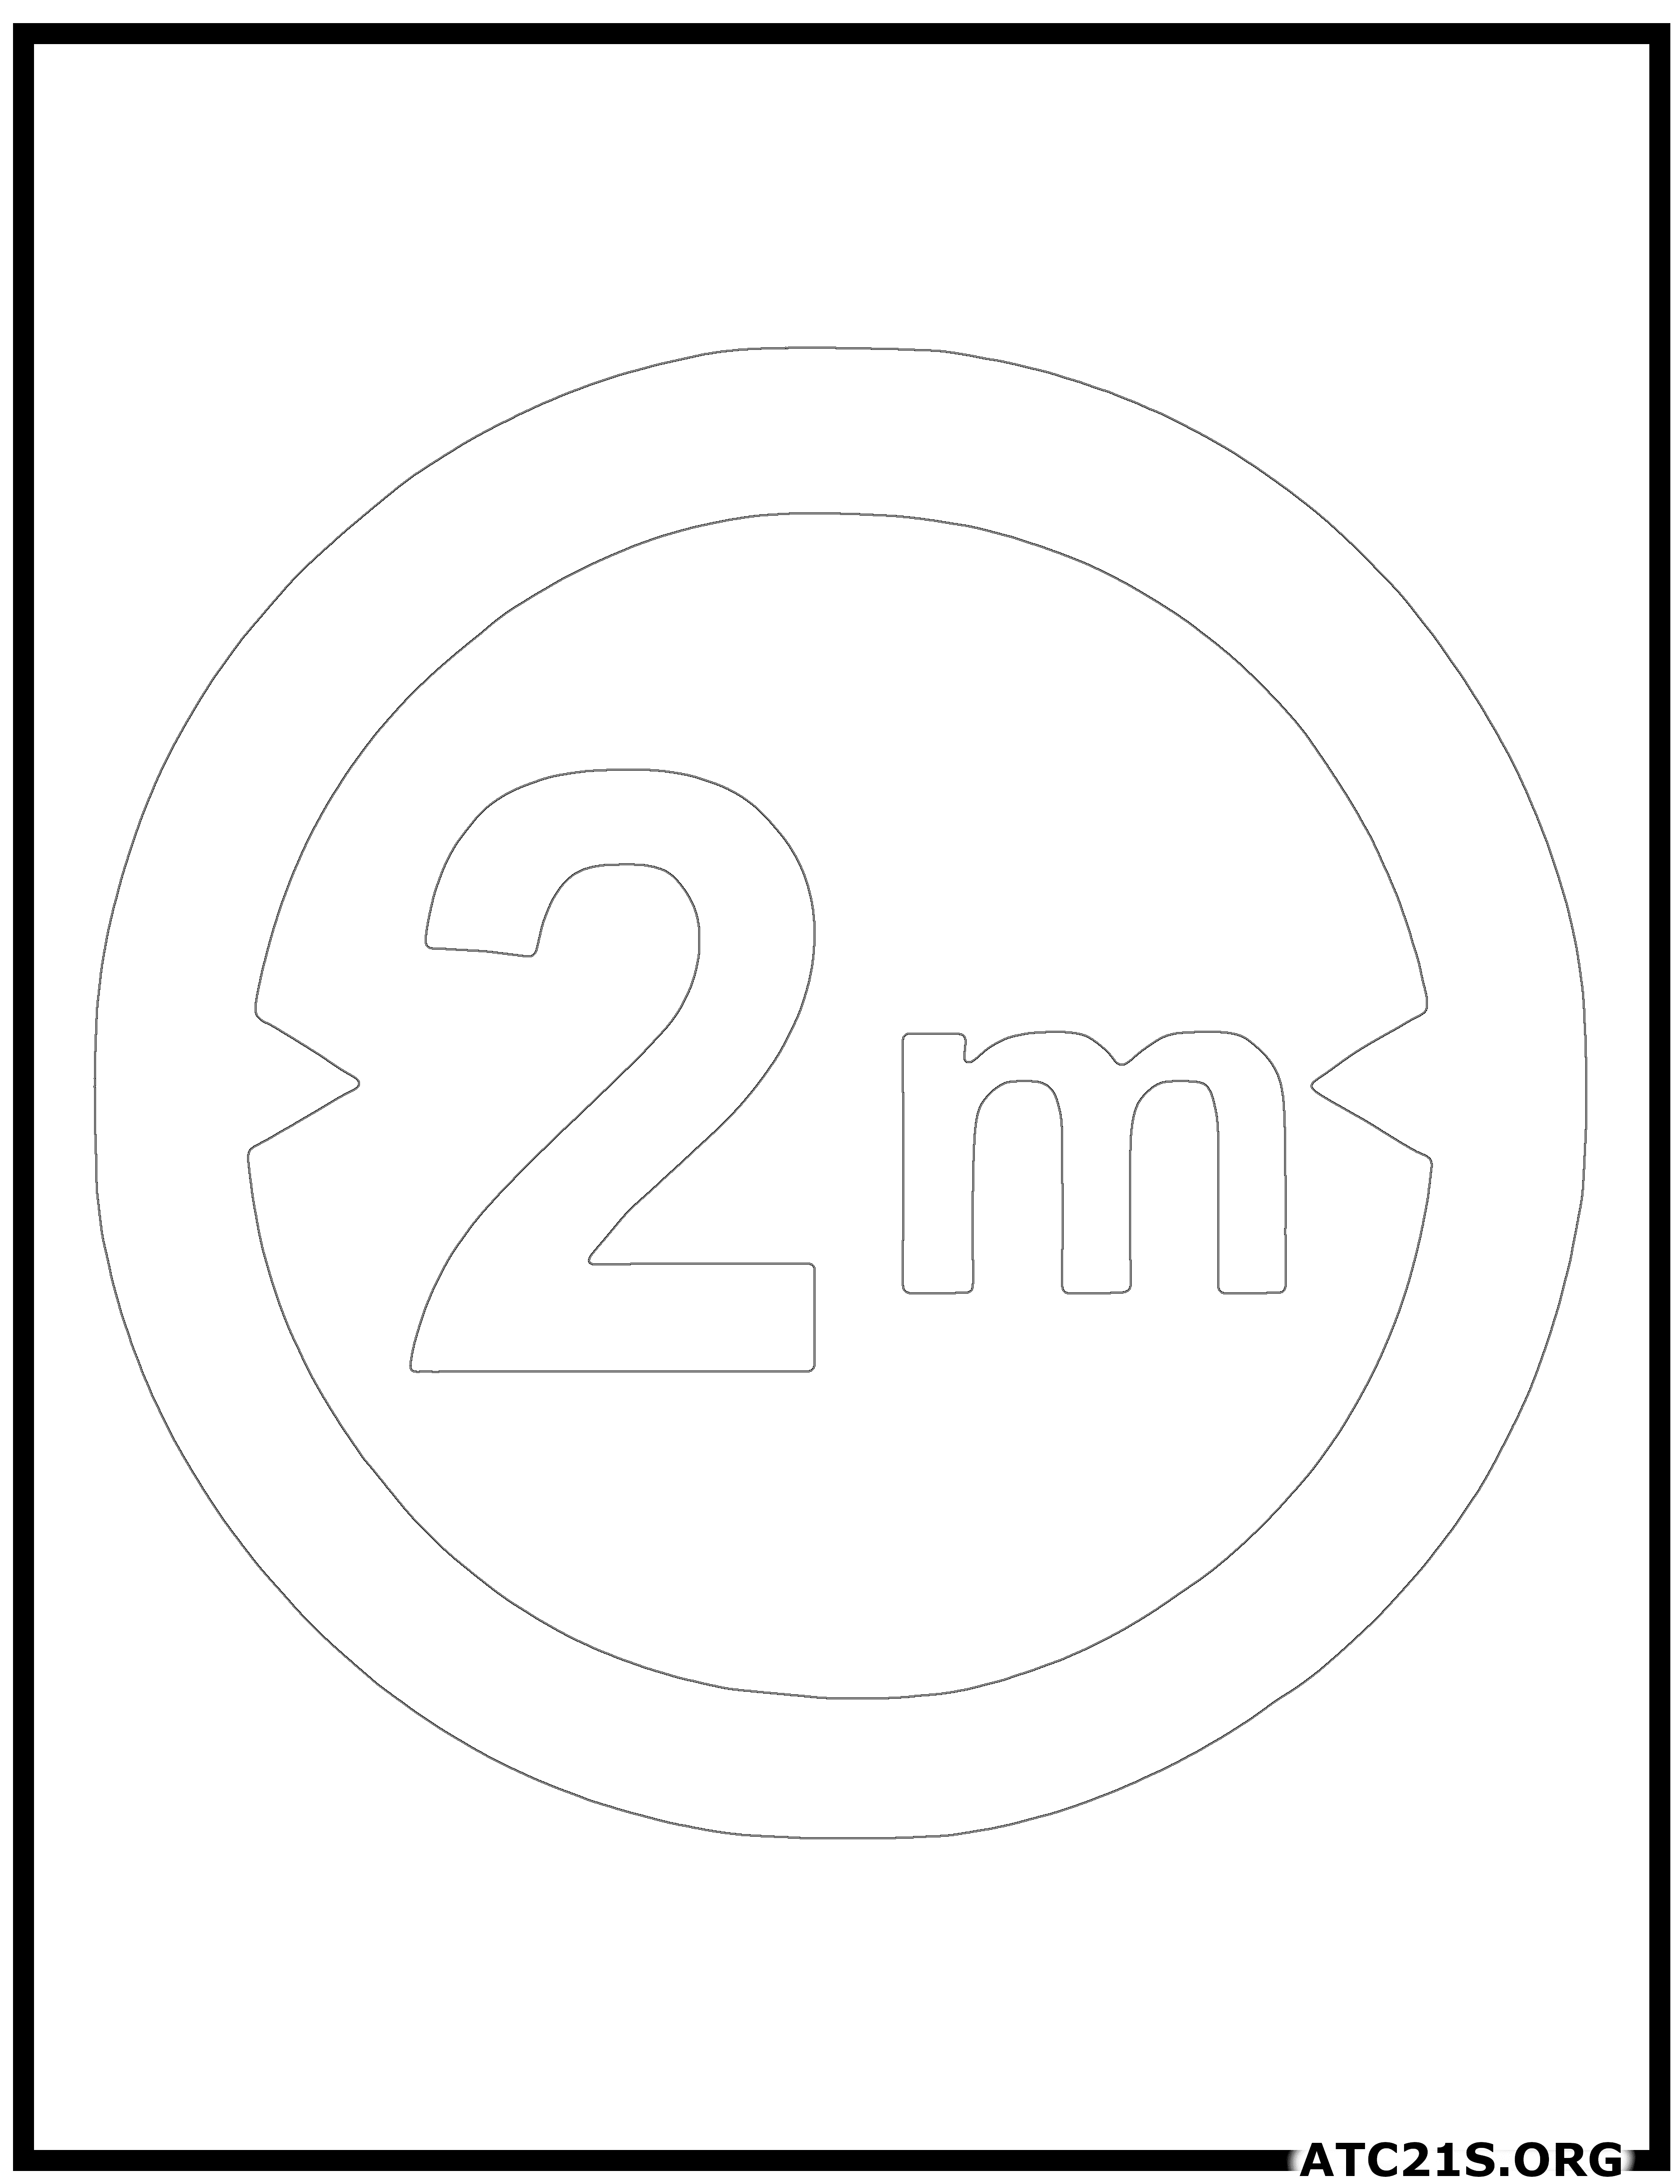 Width-limit-traffic-sign-coloring-page